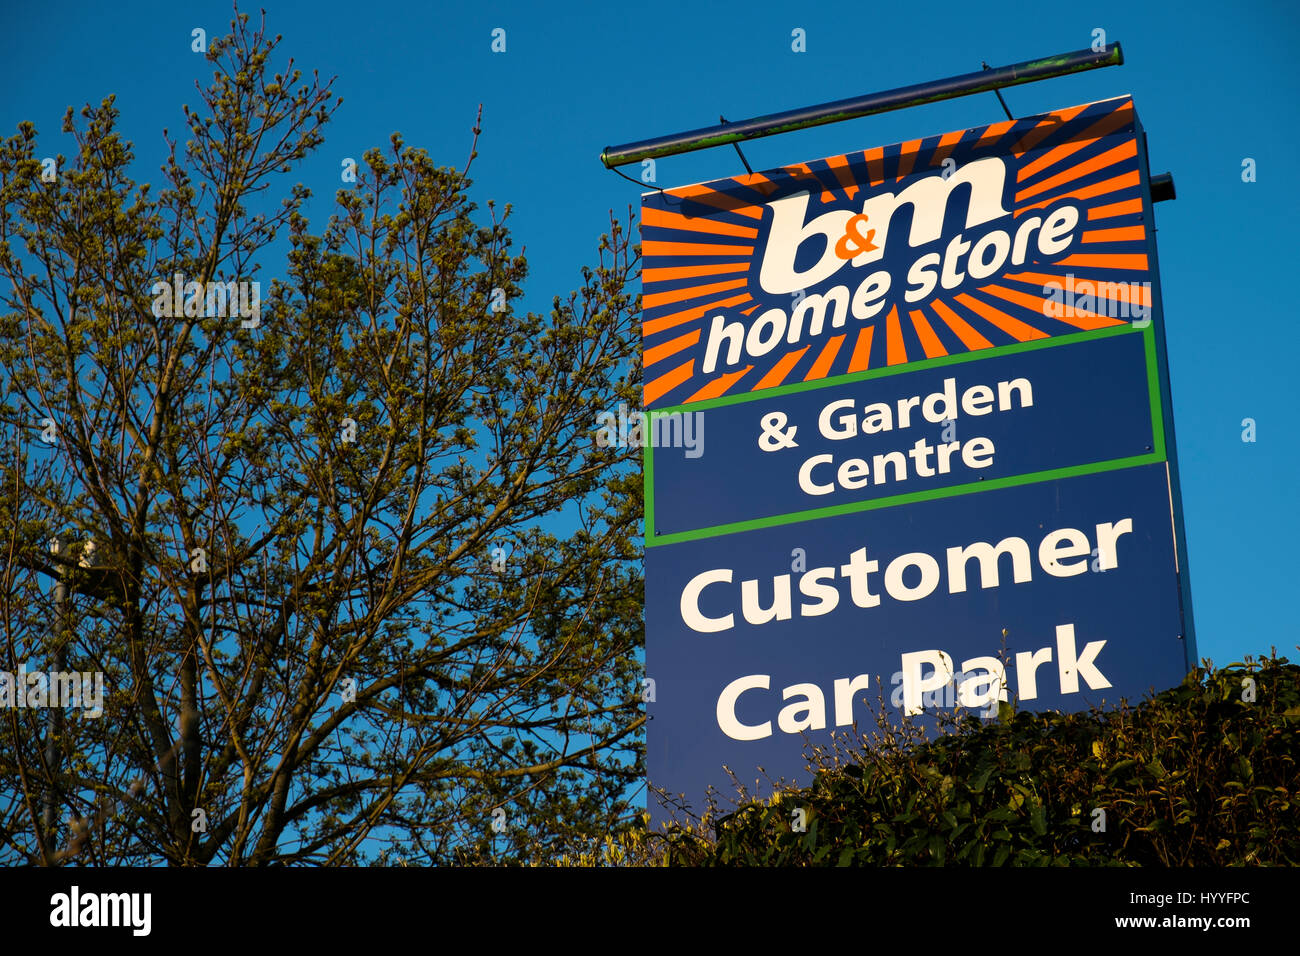 B&M Home Store and Garden Centre in Towcester, Northamptonshire, UK Stock Photo